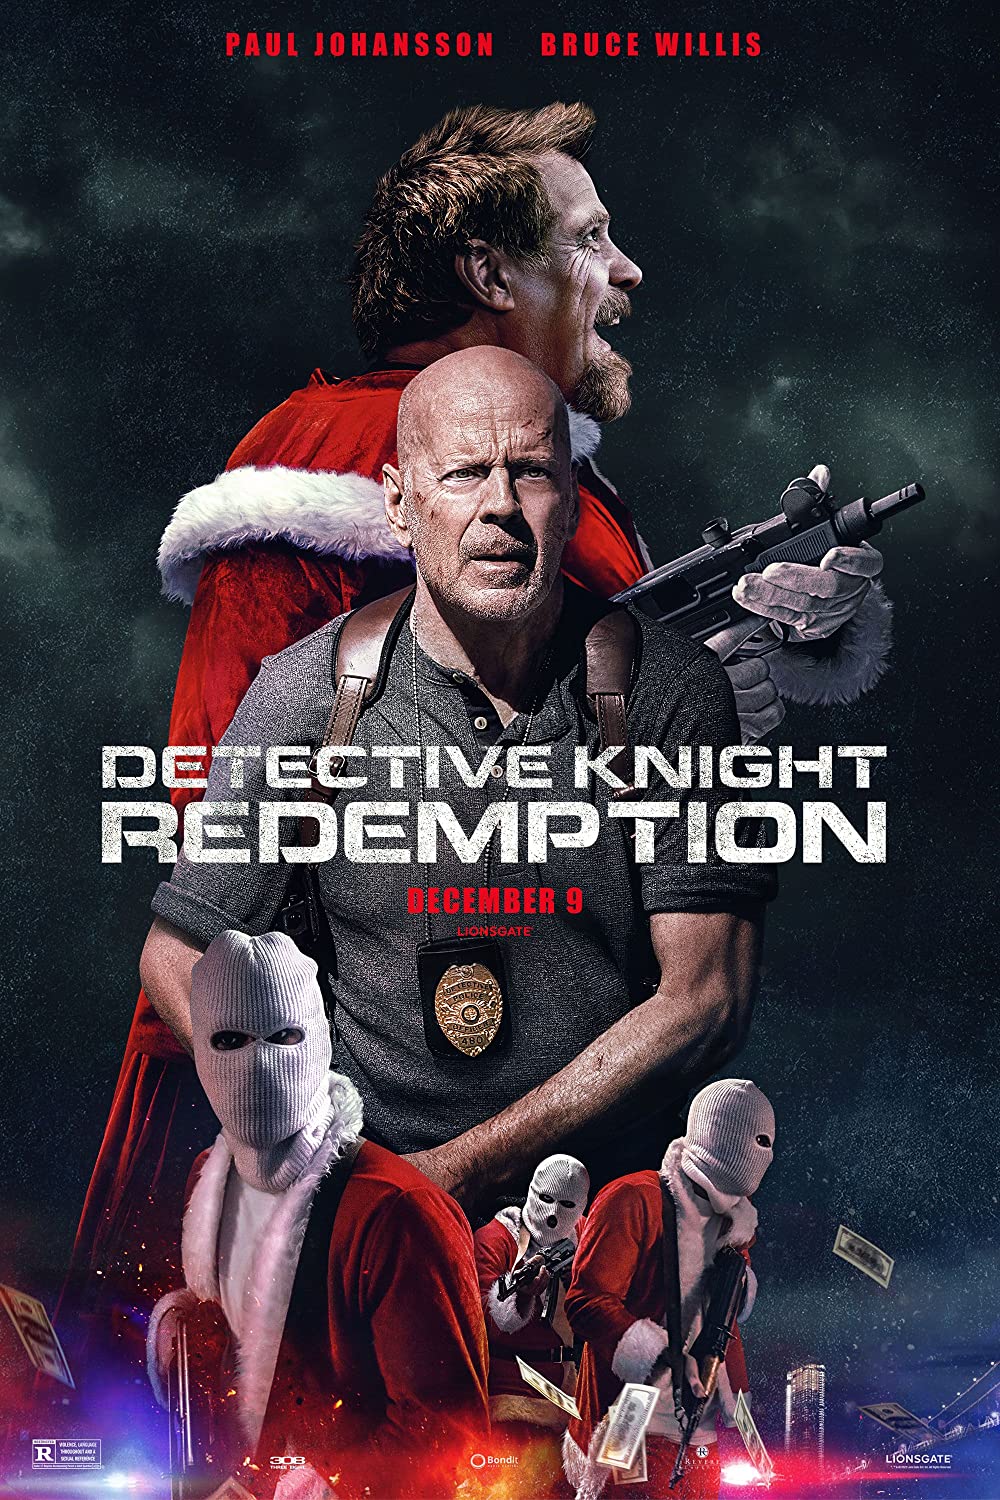 Detective Knight Redemption (2022) 480p BluRay Hindi ORG Dual Audio Movie ESubs [500MB]